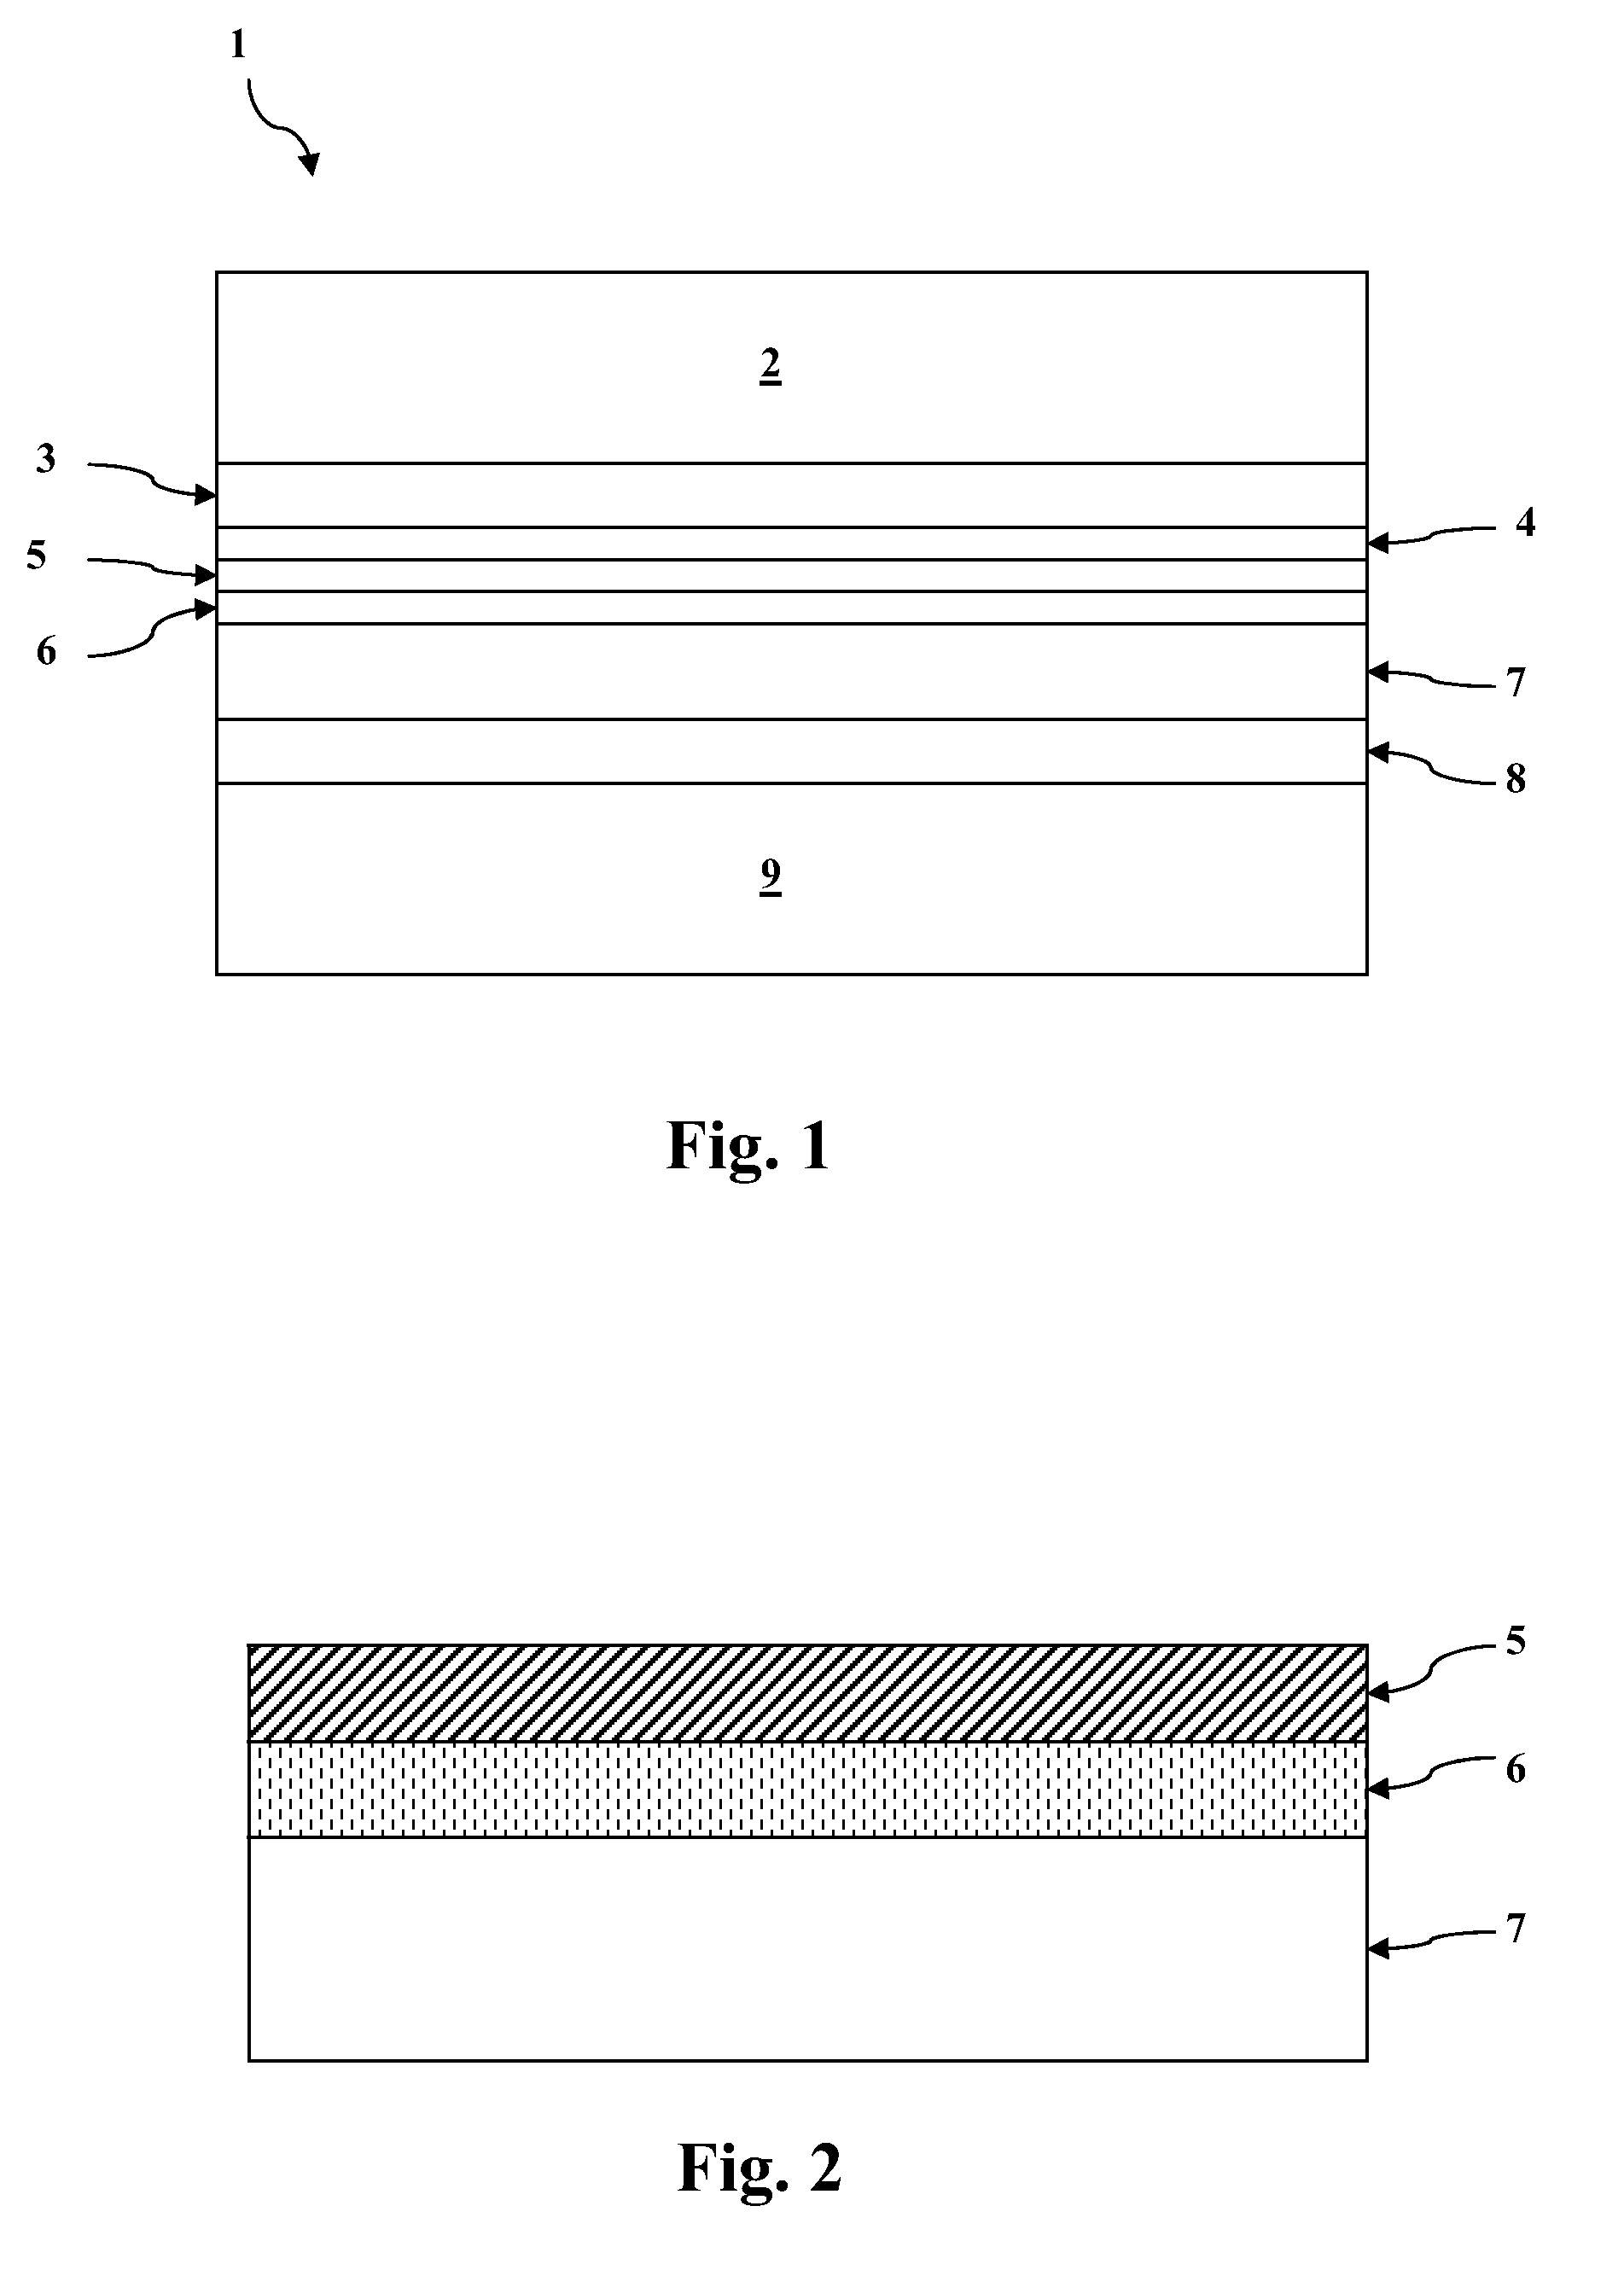 Systems and methods of intermixing cadmium sulfide layers and cadmium telluride layers for thin film photovoltaic devices